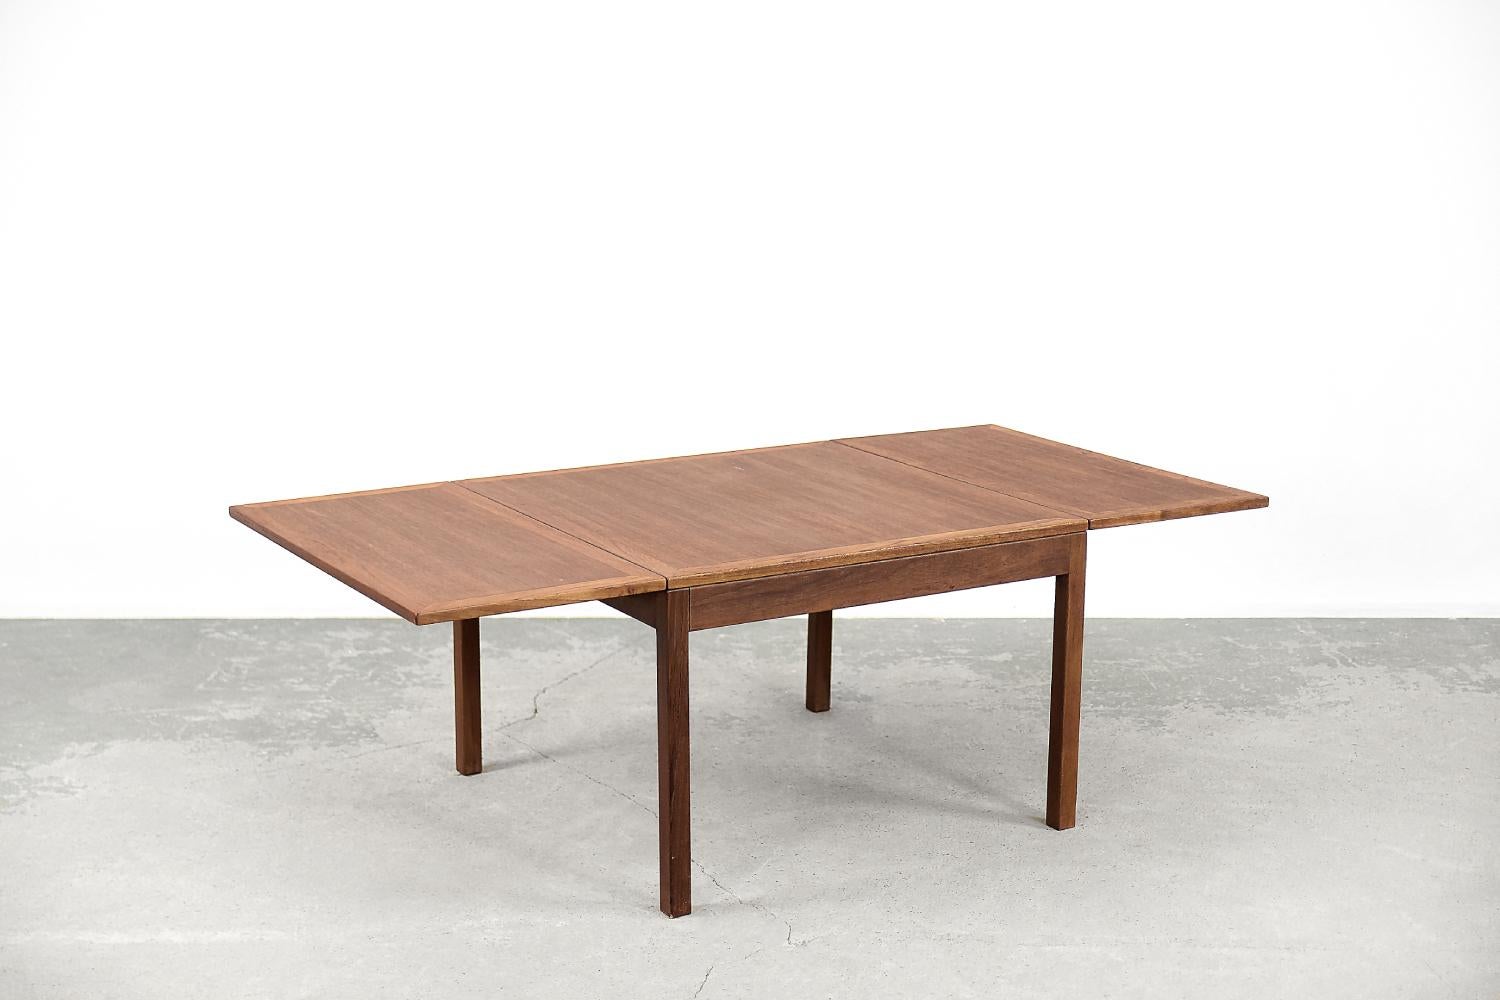 This extendable coffee table was designed by Børge Mogensen for the Danish manufacture Fredericia Stolefabrik during the 1960s. Cataloge number 5362. Table made of teak with a warm, brown color. Teak wood is very durable, it comes from four types of